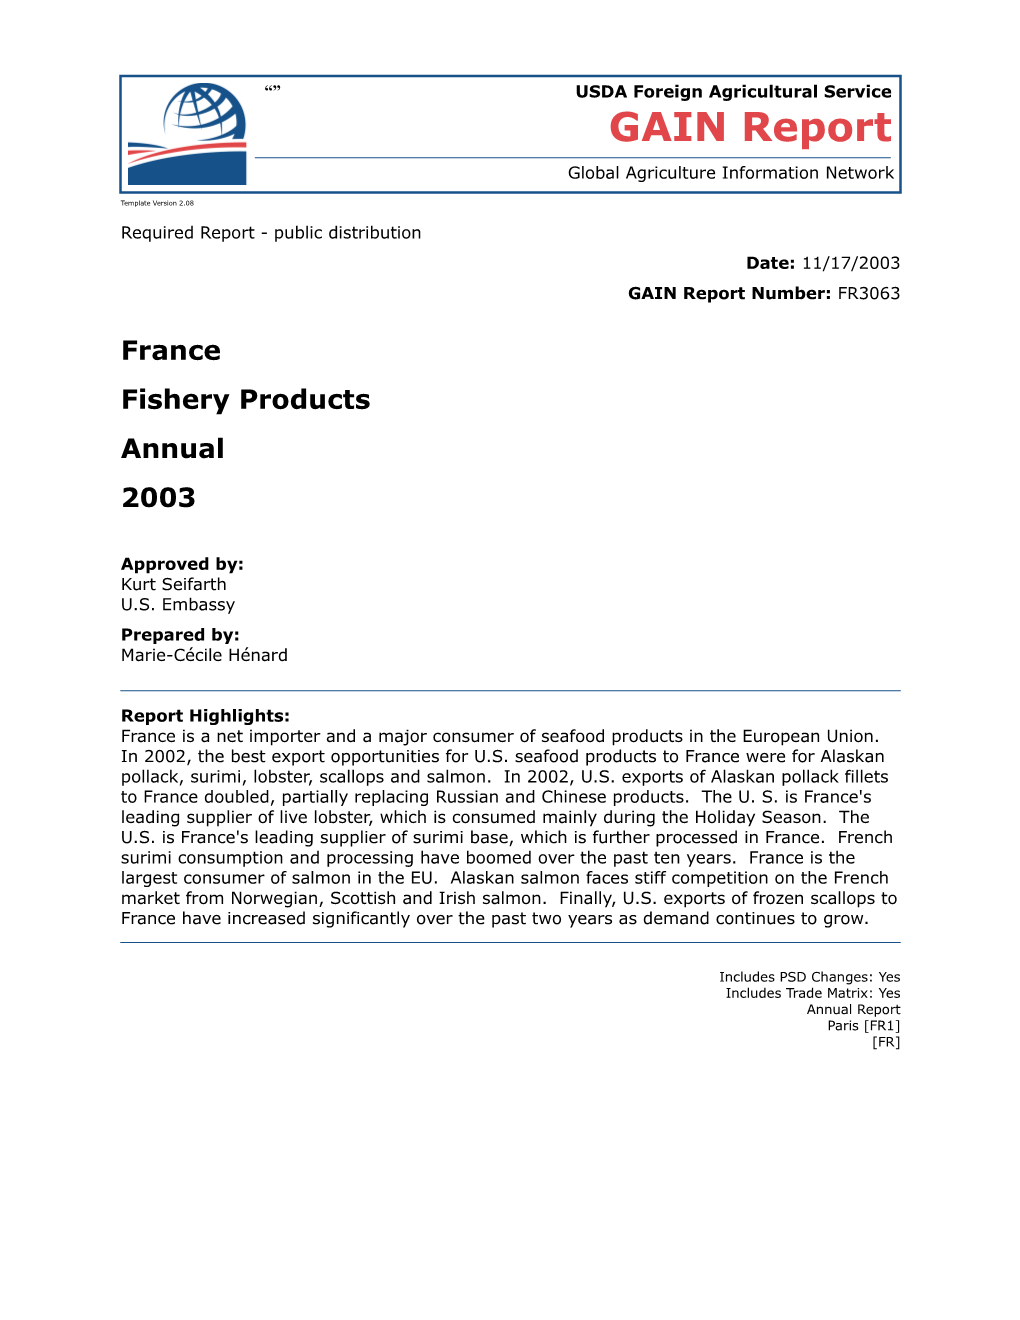 Annual Seafood Report 2003